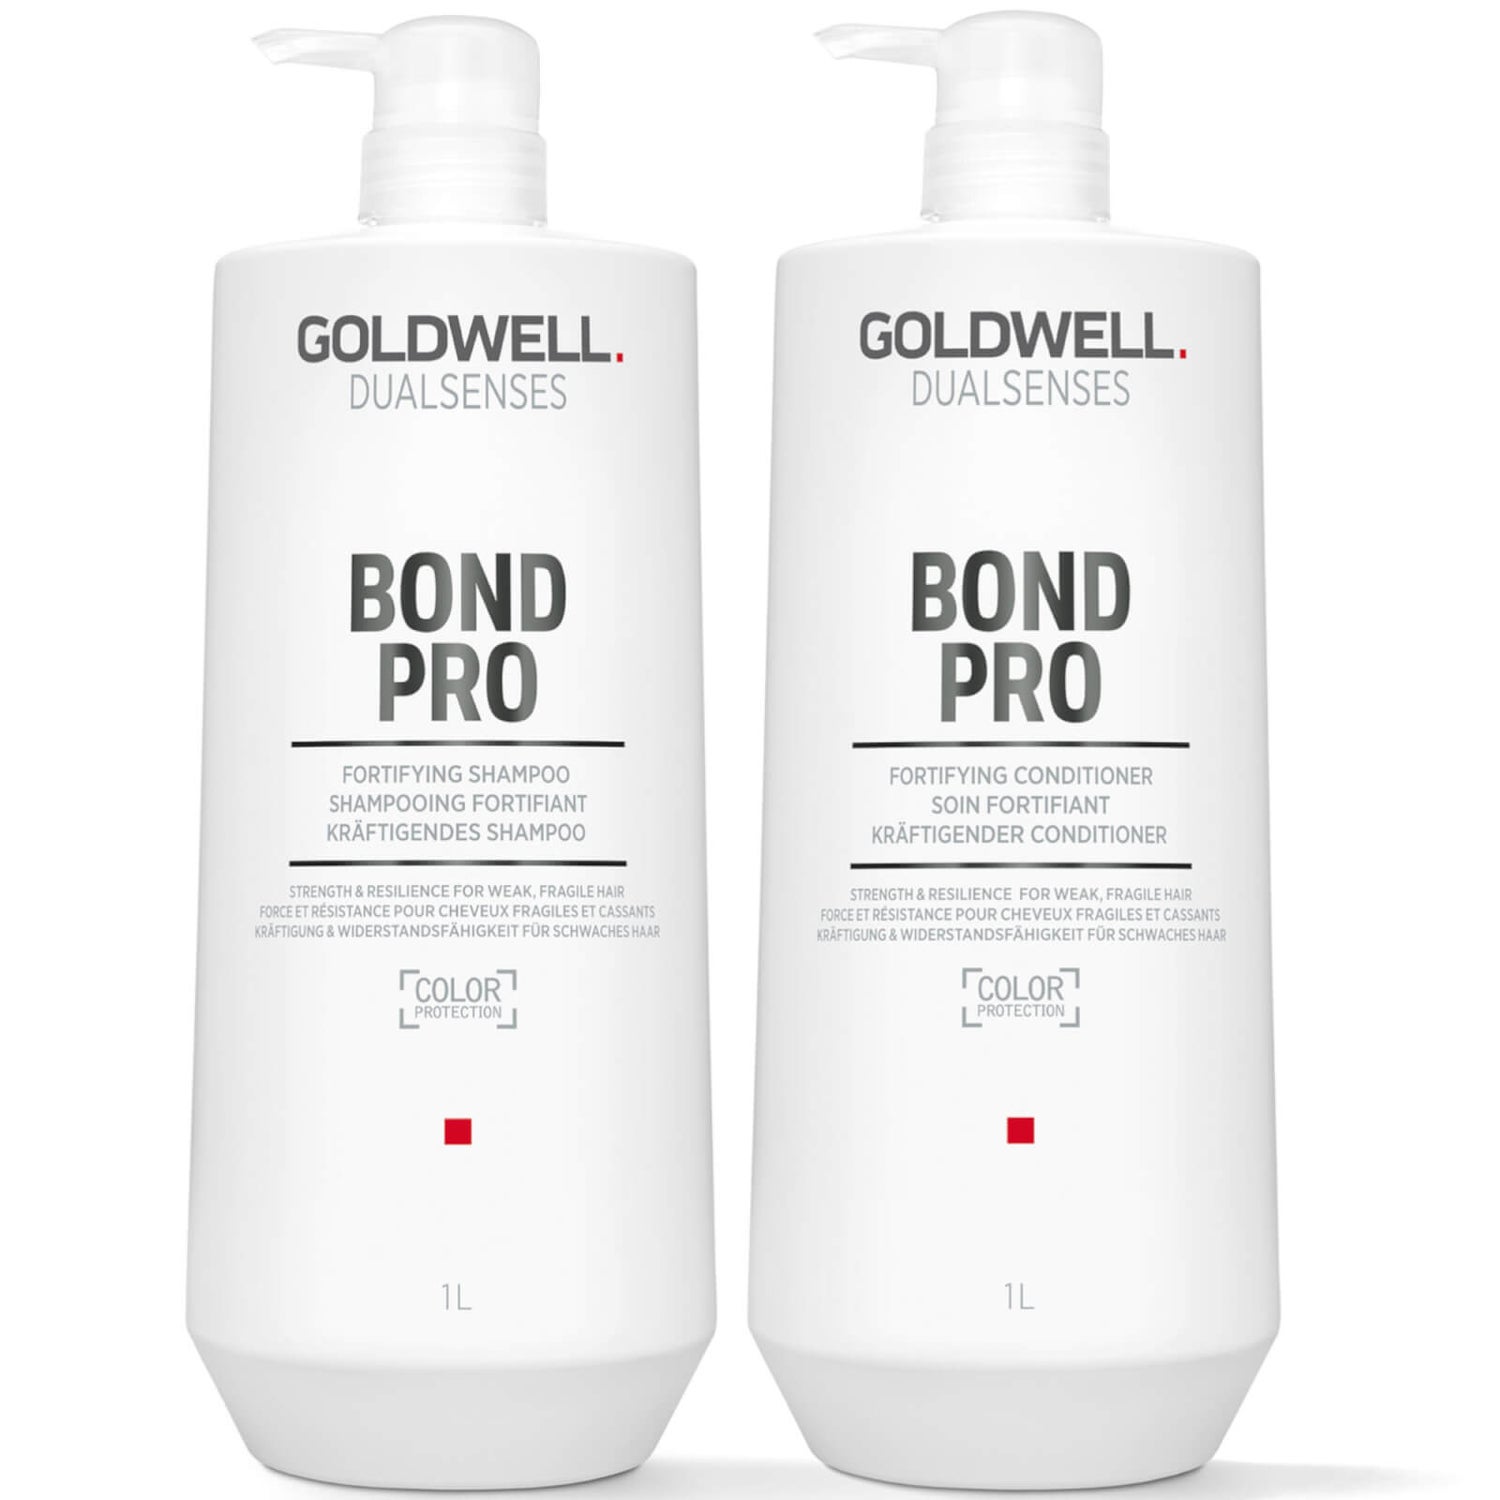 Goldwell Dualsenses Bondpro+ Shampoo And Conditioner 1L Duo For Dry, Damaged Hair